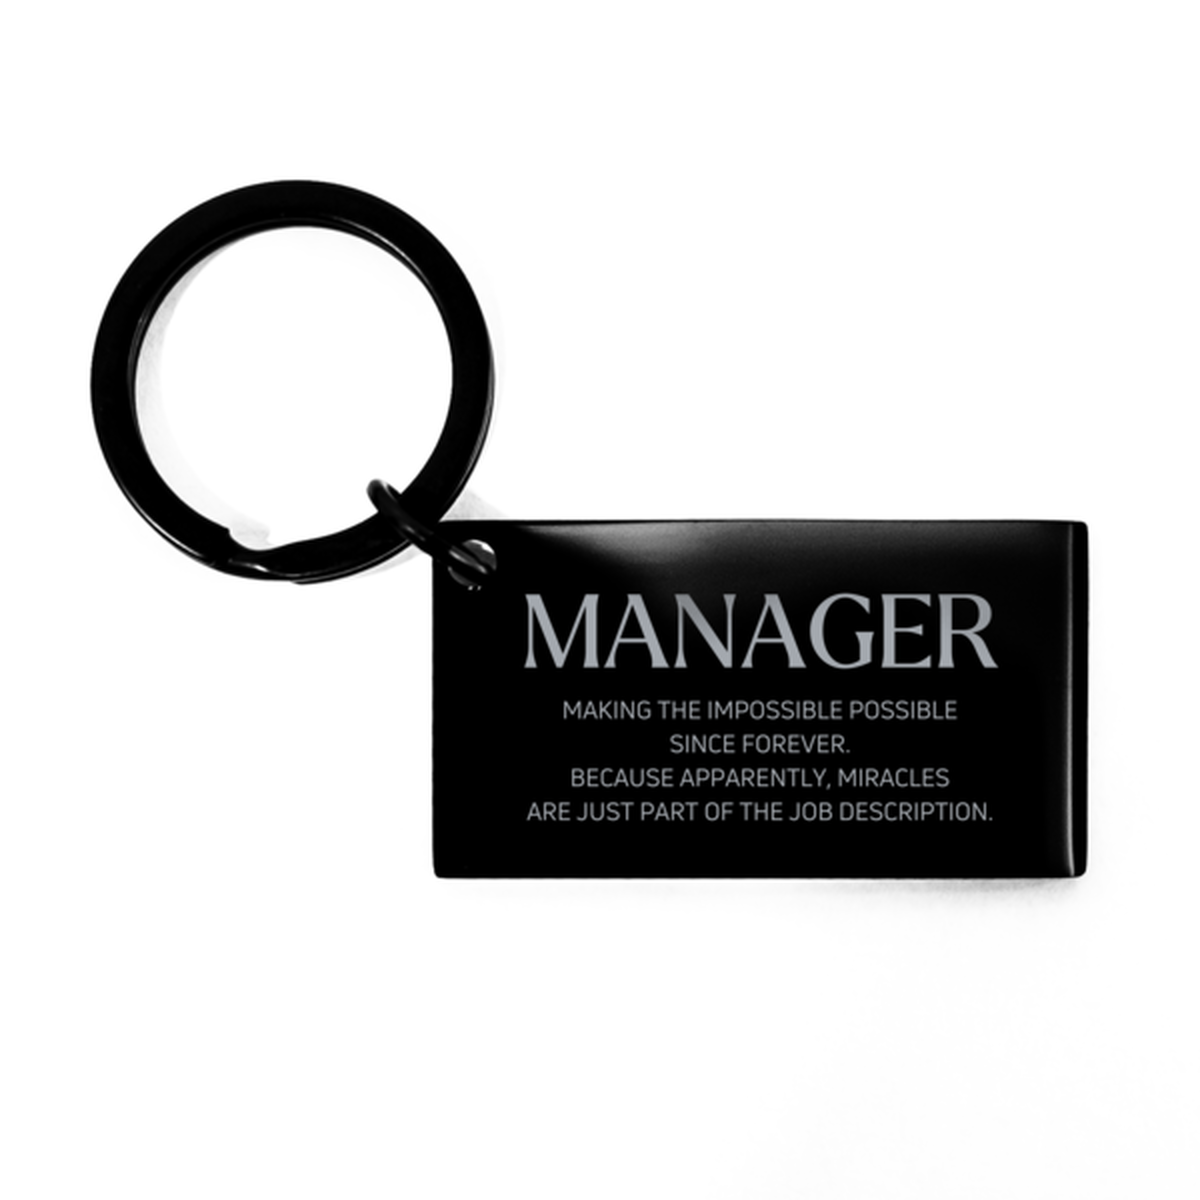 Funny Manager Gifts, Miracles are just part of the job description, Inspirational Birthday Keychain For Manager, Men, Women, Coworkers, Friends, Boss